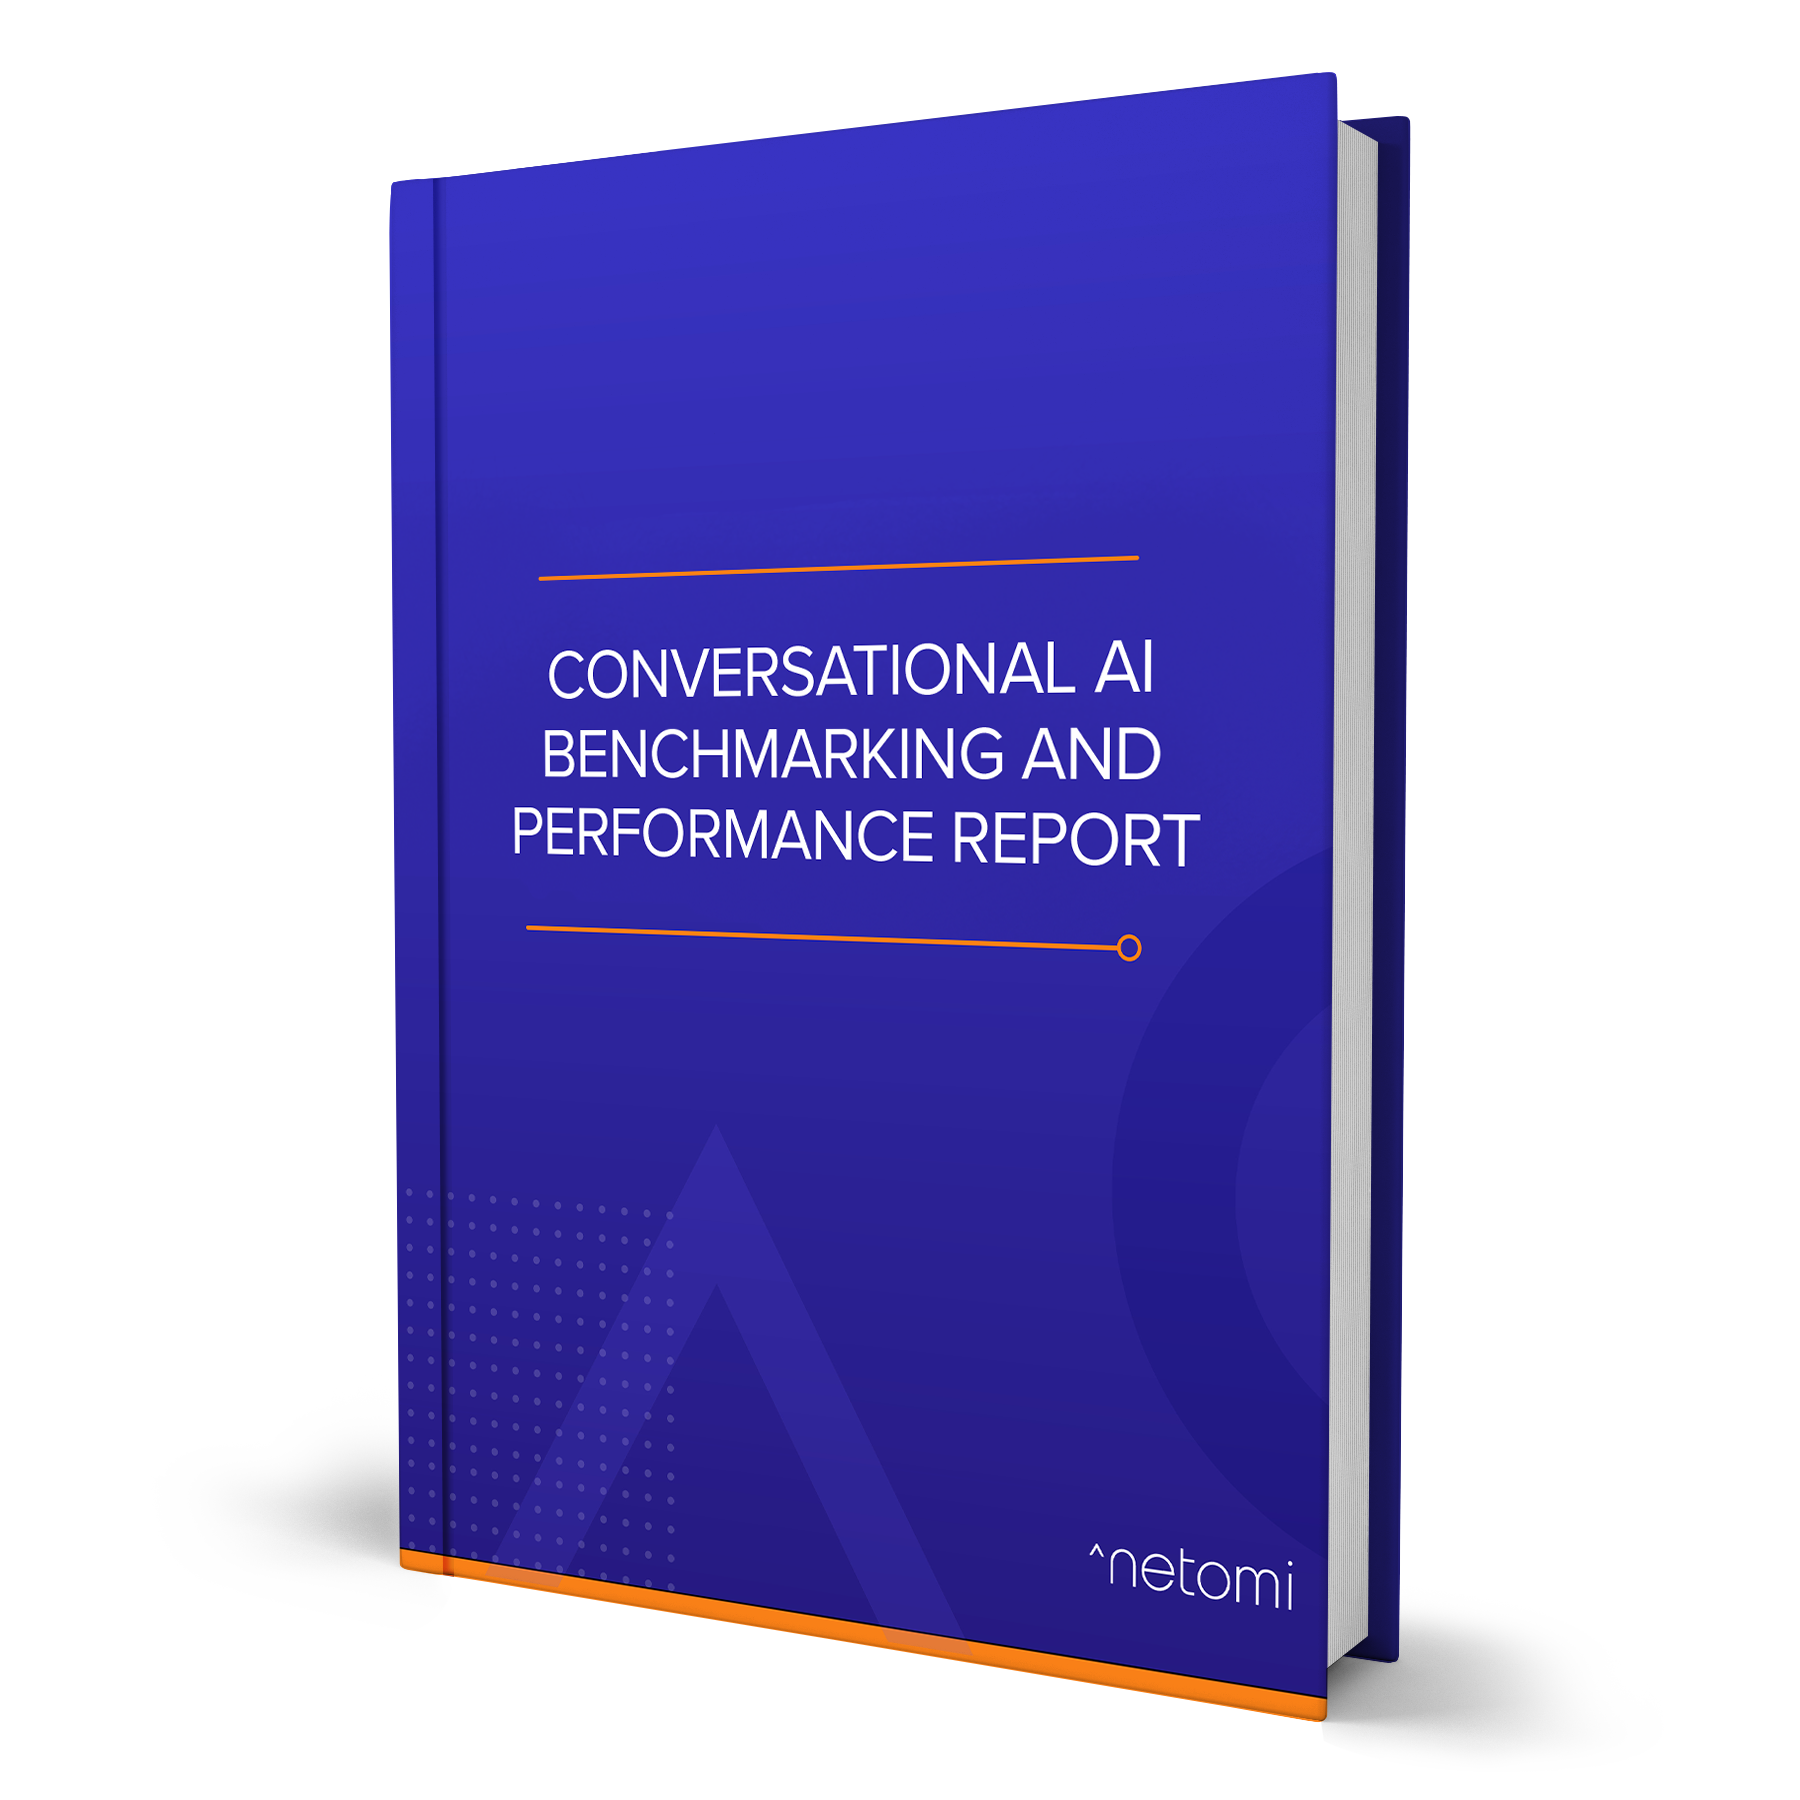 Conversational AI Benchmarking and Performance Report.
